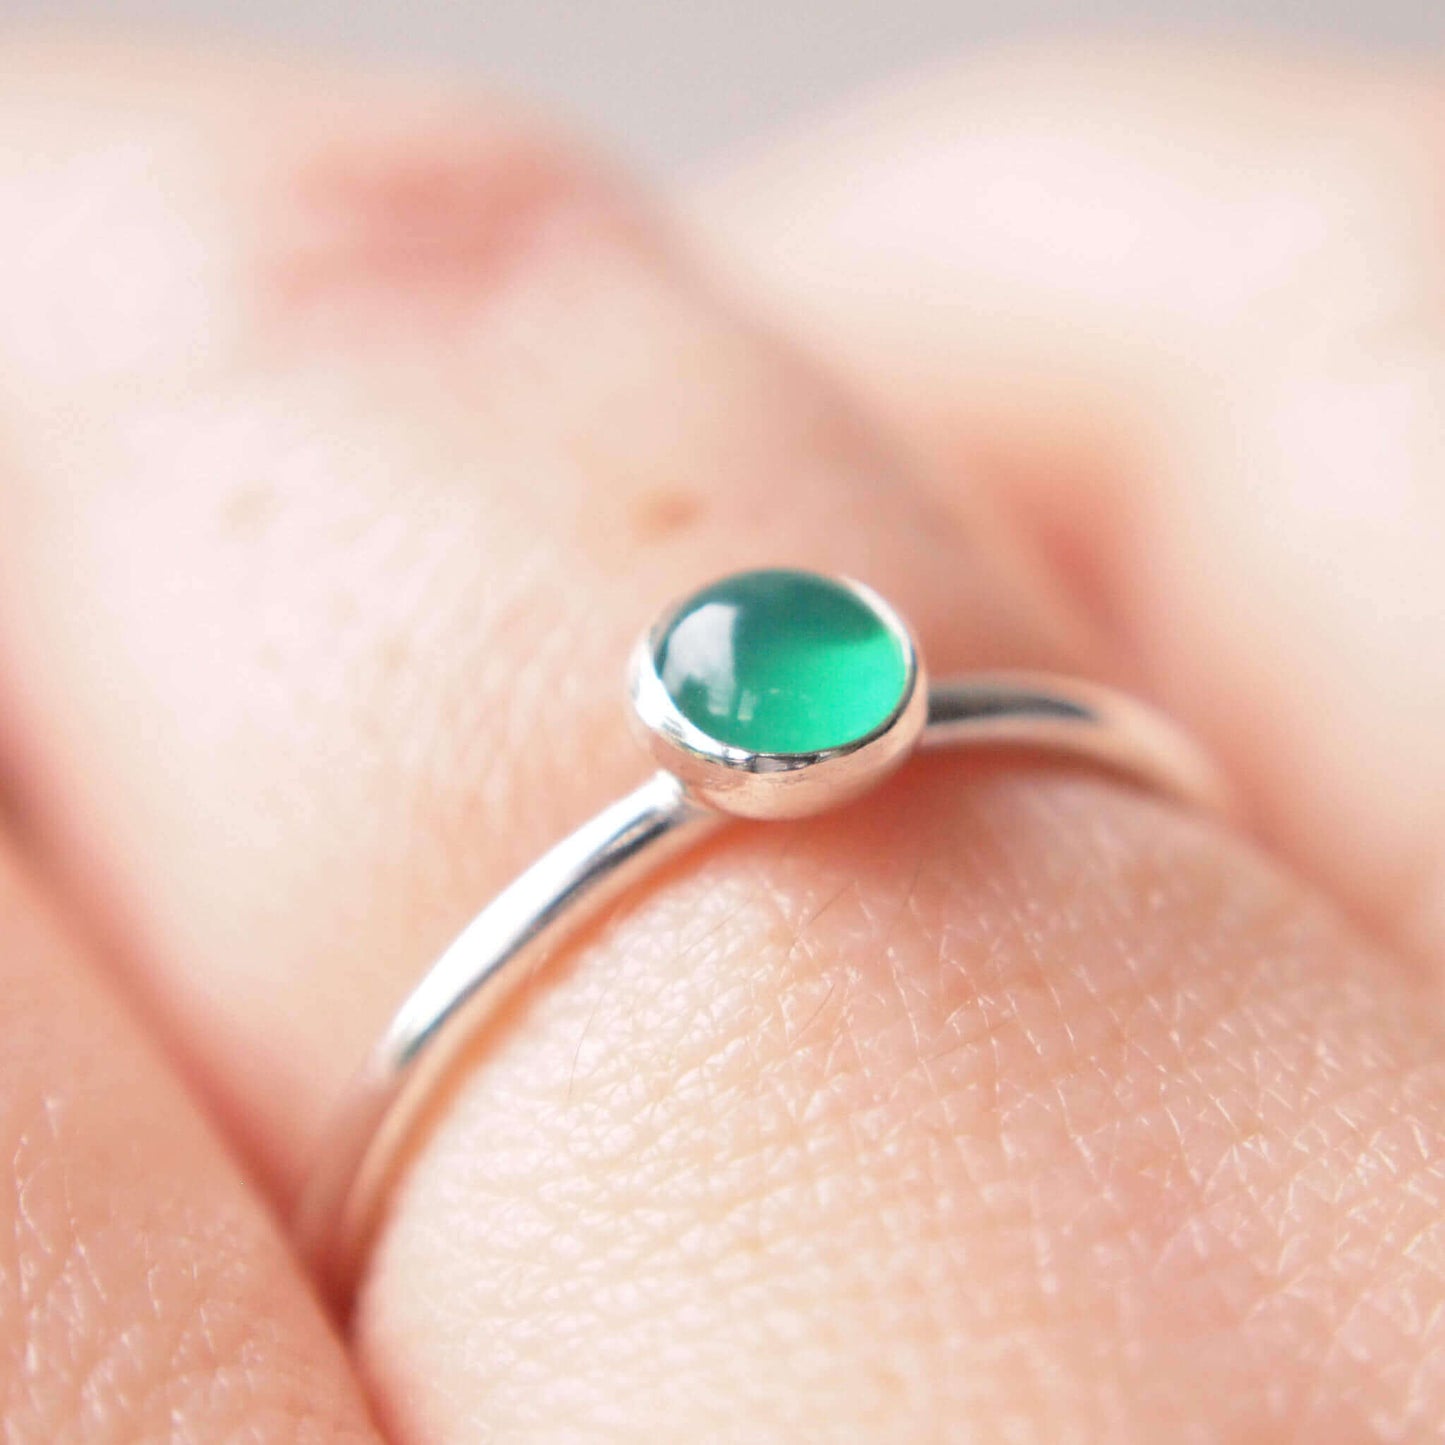 Green Agate Ring. A 5mm round cabochon emerald Green Agate, birthstone for May  set very simply onto a round band of sterling silver. handmade by maram jewellery in Scotland